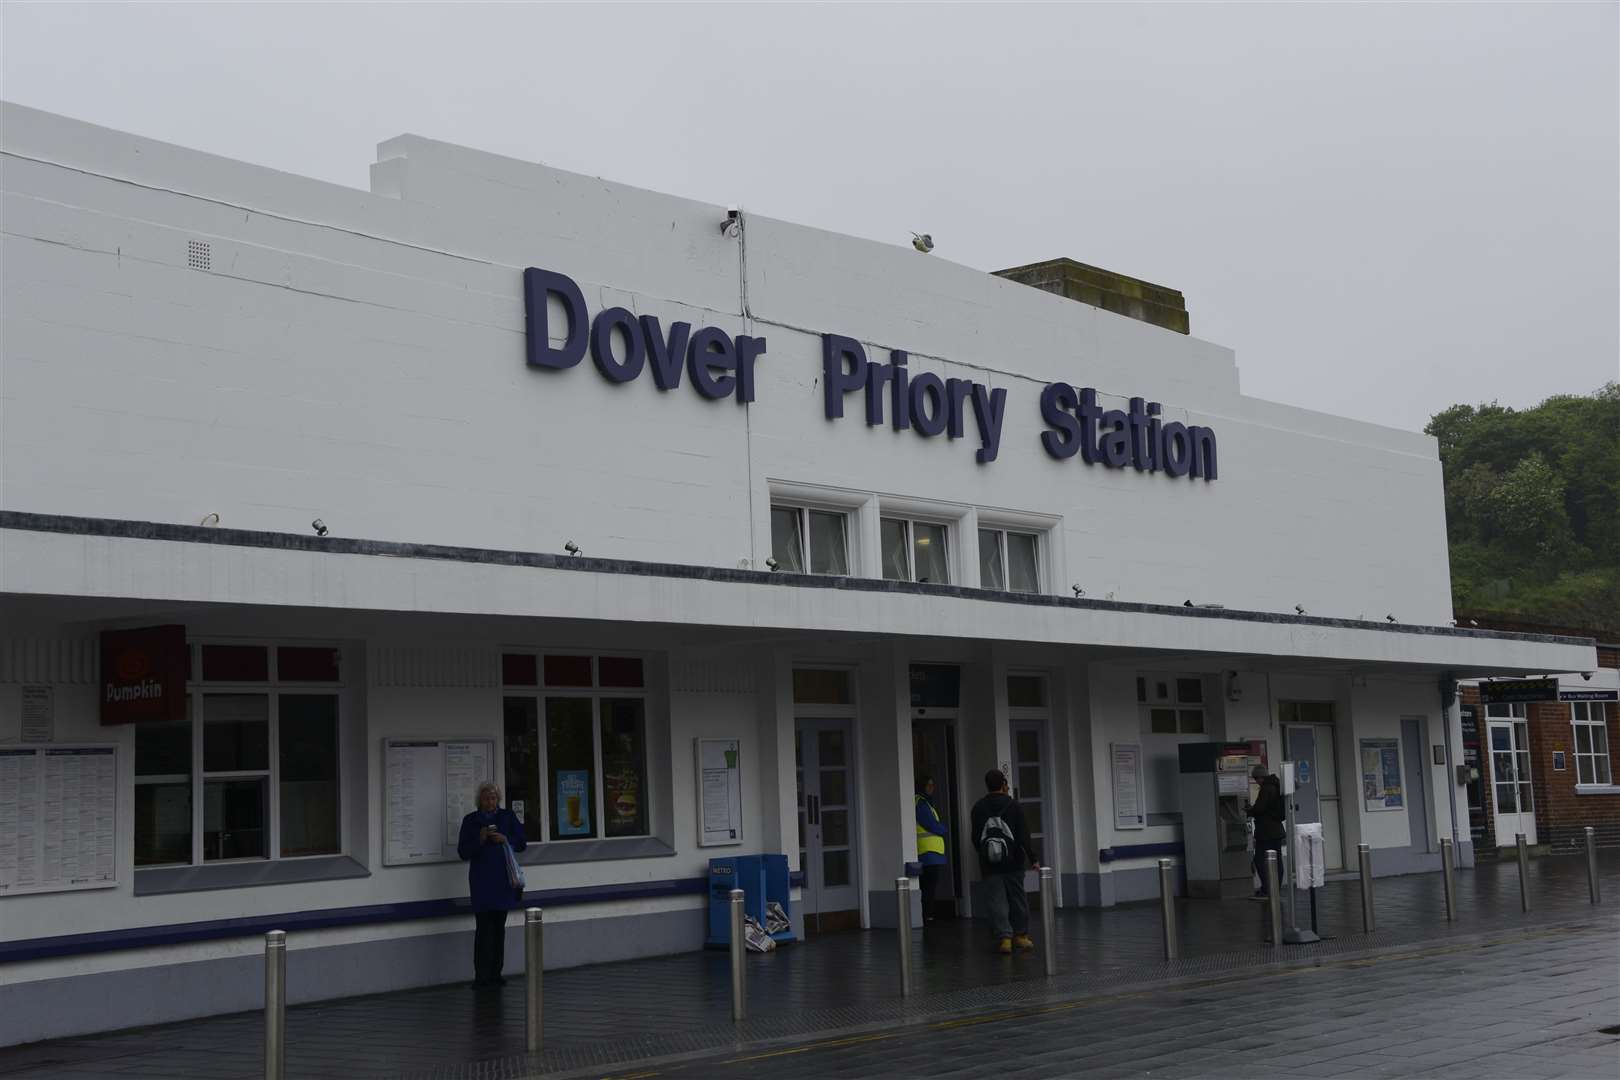 The new bus will stop at Dover Priory Station. Library picture: Paul Amos